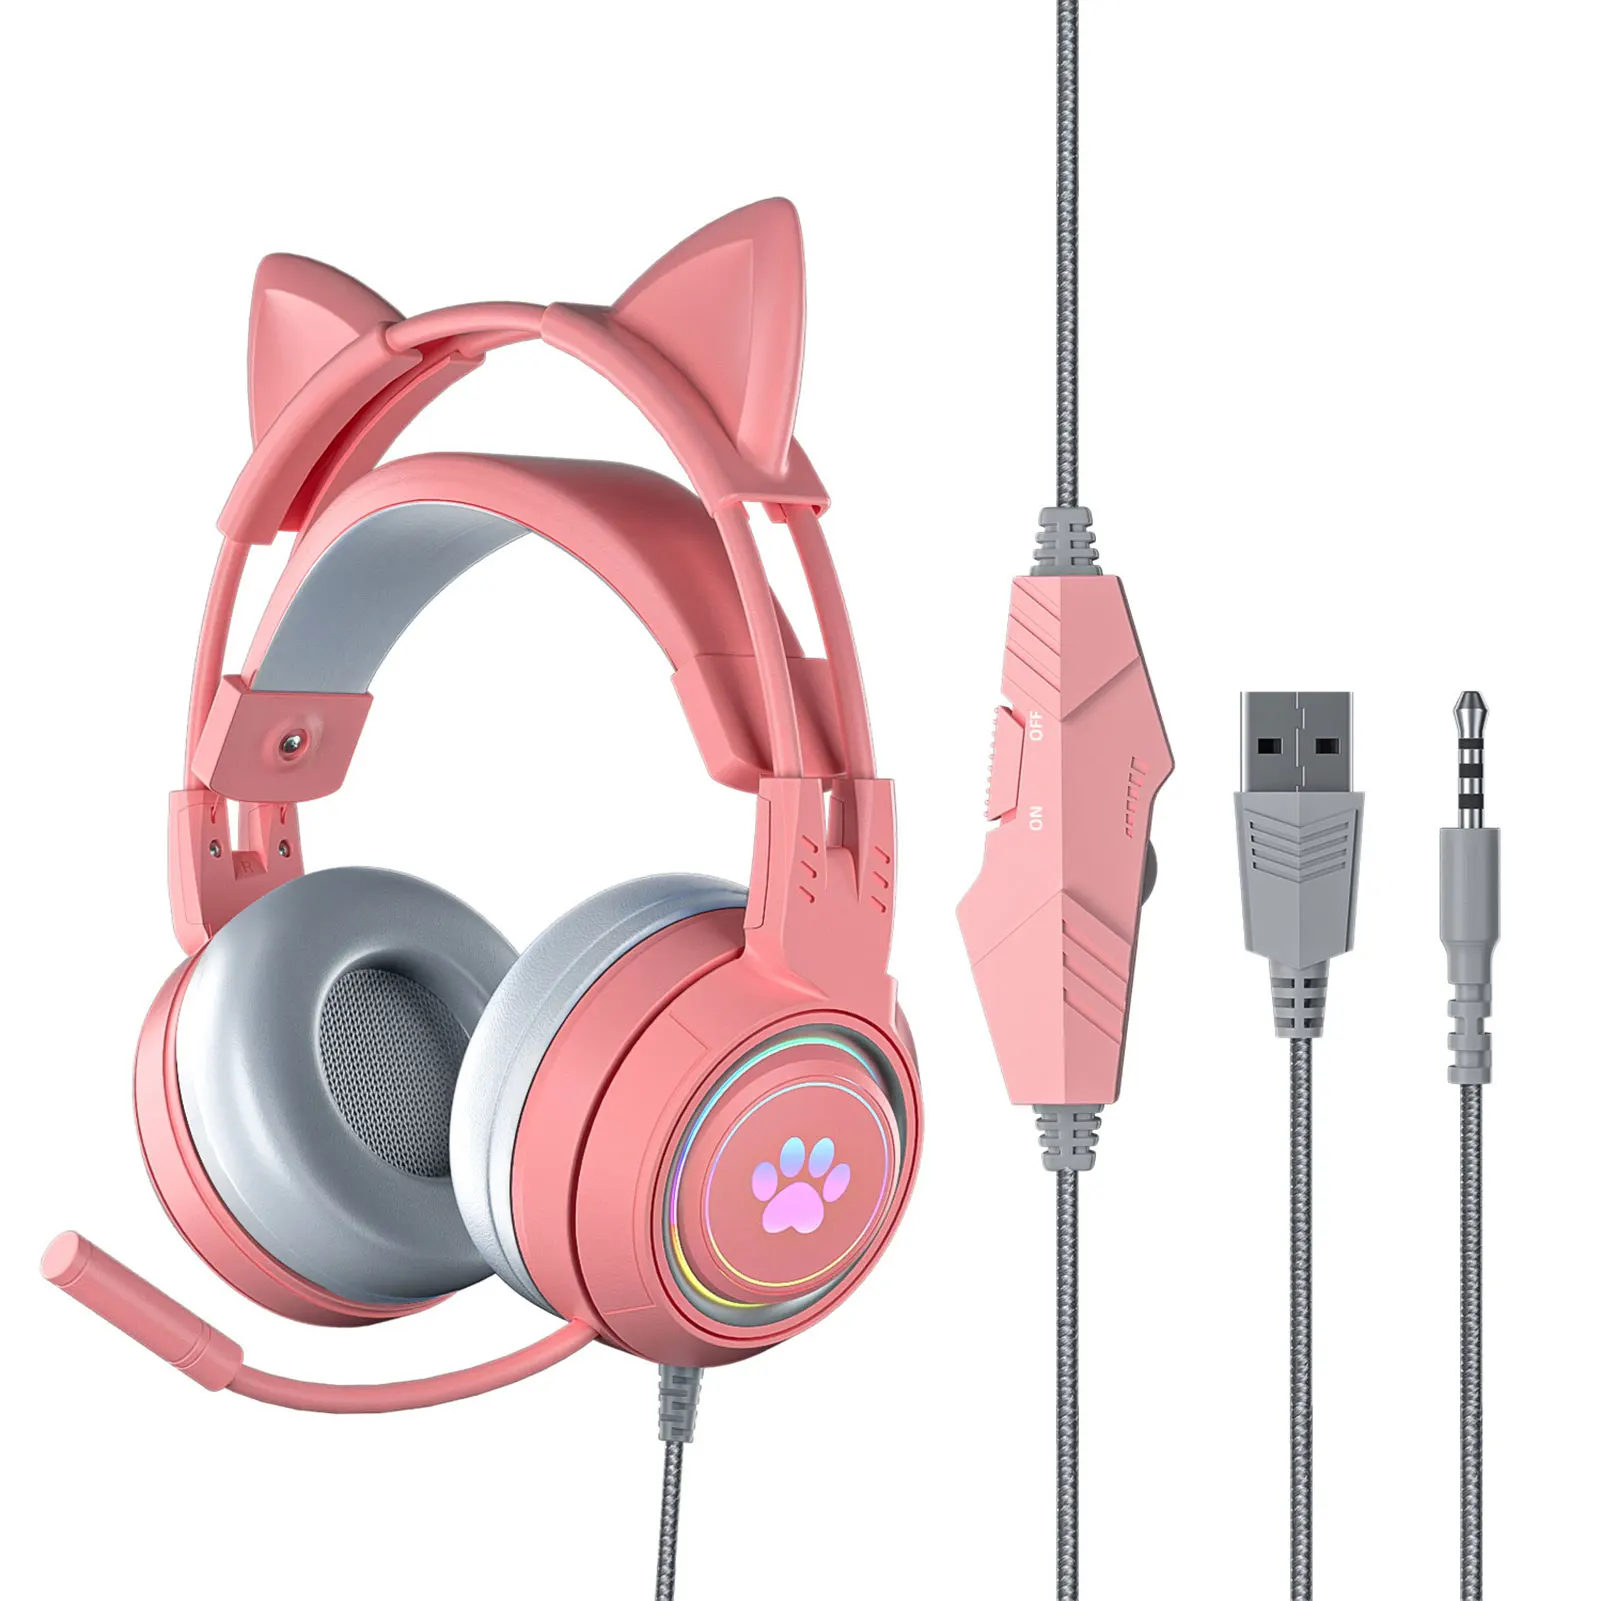 

Wired Gaming Headset 3.5mm Jack Noise Cancelling Mic Headphone With Detachable Cat Ears RGB Backlight Cute Kids Earphone